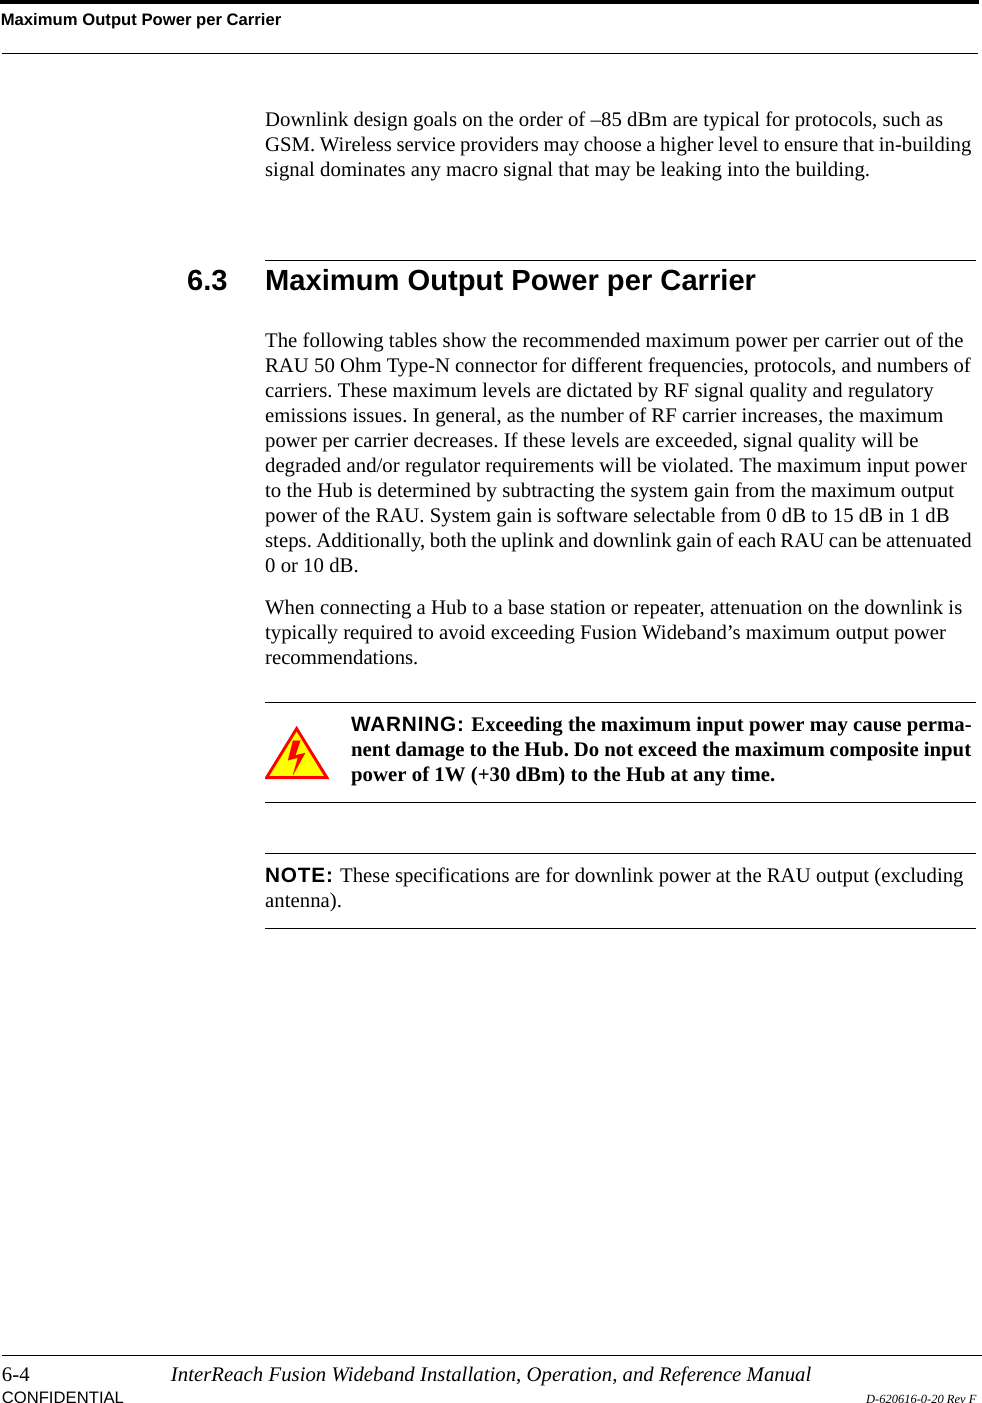 Maximum Output Power per Carrier6-4 InterReach Fusion Wideband Installation, Operation, and Reference ManualCONFIDENTIAL D-620616-0-20 Rev FDownlink design goals on the order of –85 dBm are typical for protocols, such as GSM. Wireless service providers may choose a higher level to ensure that in-building signal dominates any macro signal that may be leaking into the building.6.3 Maximum Output Power per CarrierThe following tables show the recommended maximum power per carrier out of the RAU 50 Ohm Type-N connector for different frequencies, protocols, and numbers of carriers. These maximum levels are dictated by RF signal quality and regulatory emissions issues. In general, as the number of RF carrier increases, the maximum power per carrier decreases. If these levels are exceeded, signal quality will be degraded and/or regulator requirements will be violated. The maximum input power to the Hub is determined by subtracting the system gain from the maximum output power of the RAU. System gain is software selectable from 0 dB to 15 dB in 1 dB steps. Additionally, both the uplink and downlink gain of each RAU can be attenuated 0 or 10 dB.When connecting a Hub to a base station or repeater, attenuation on the downlink is typically required to avoid exceeding Fusion Wideband’s maximum output power recommendations.WARNING: Exceeding the maximum input power may cause perma-nent damage to the Hub. Do not exceed the maximum composite input power of 1W (+30 dBm) to the Hub at any time.NOTE: These specifications are for downlink power at the RAU output (excluding antenna).